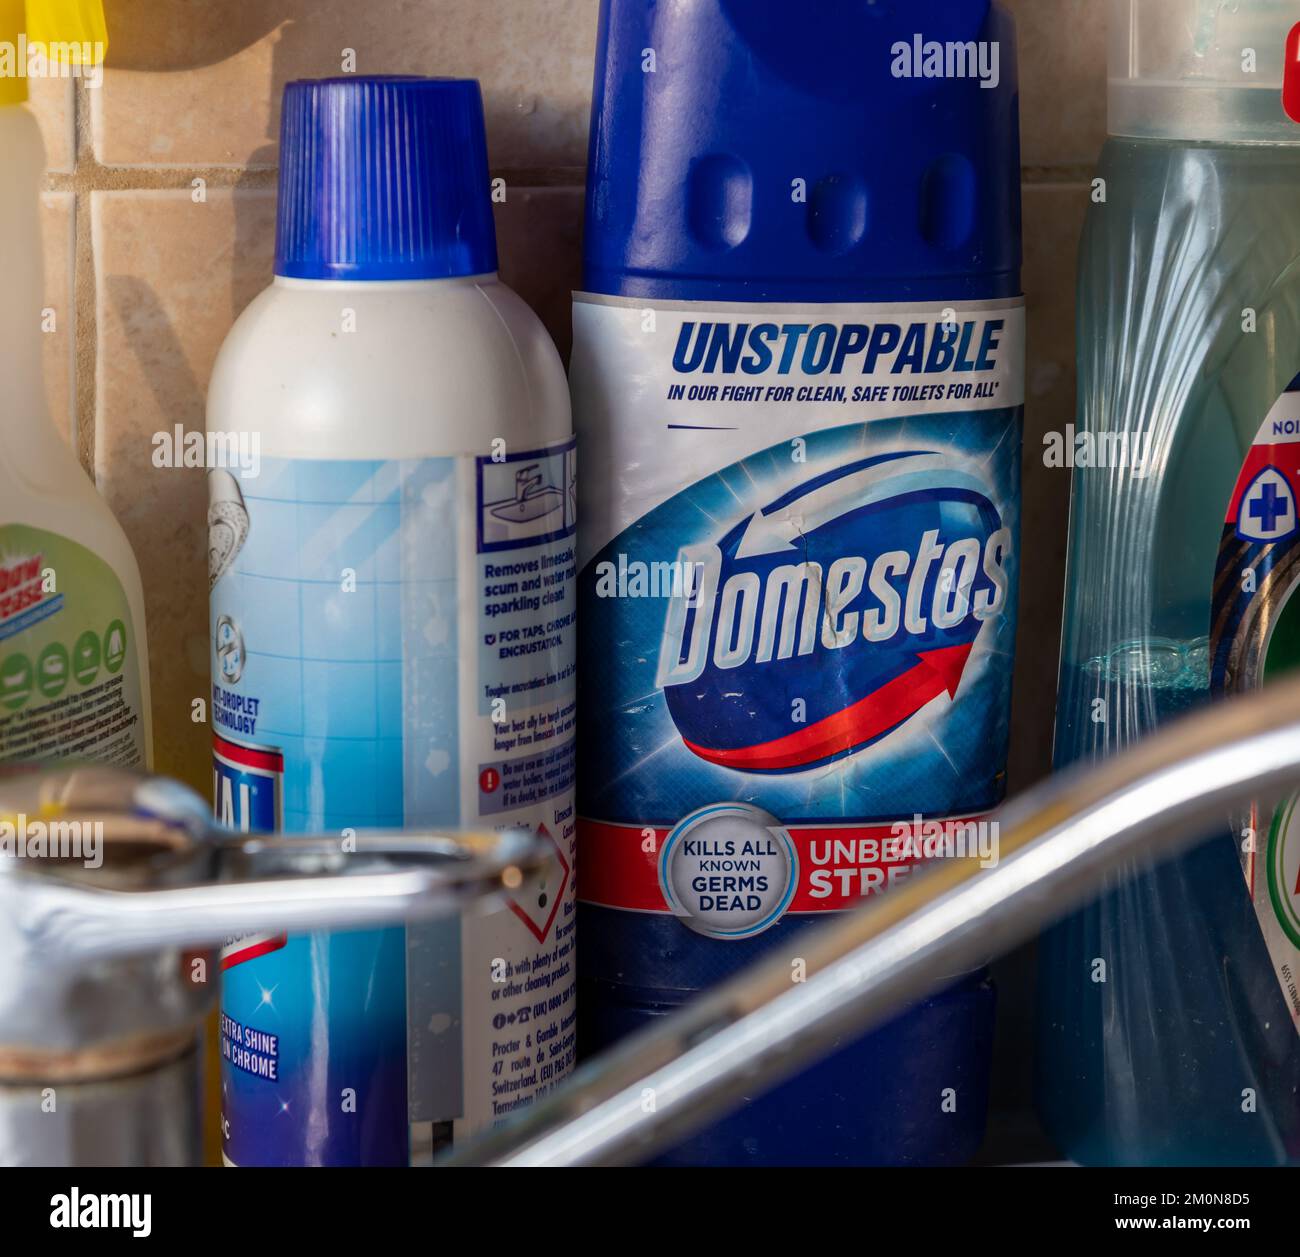 London. UK- 12.07.2022. A bottle of Domestos bleach by a kitchen sink amongst other household cleaning products. Stock Photo